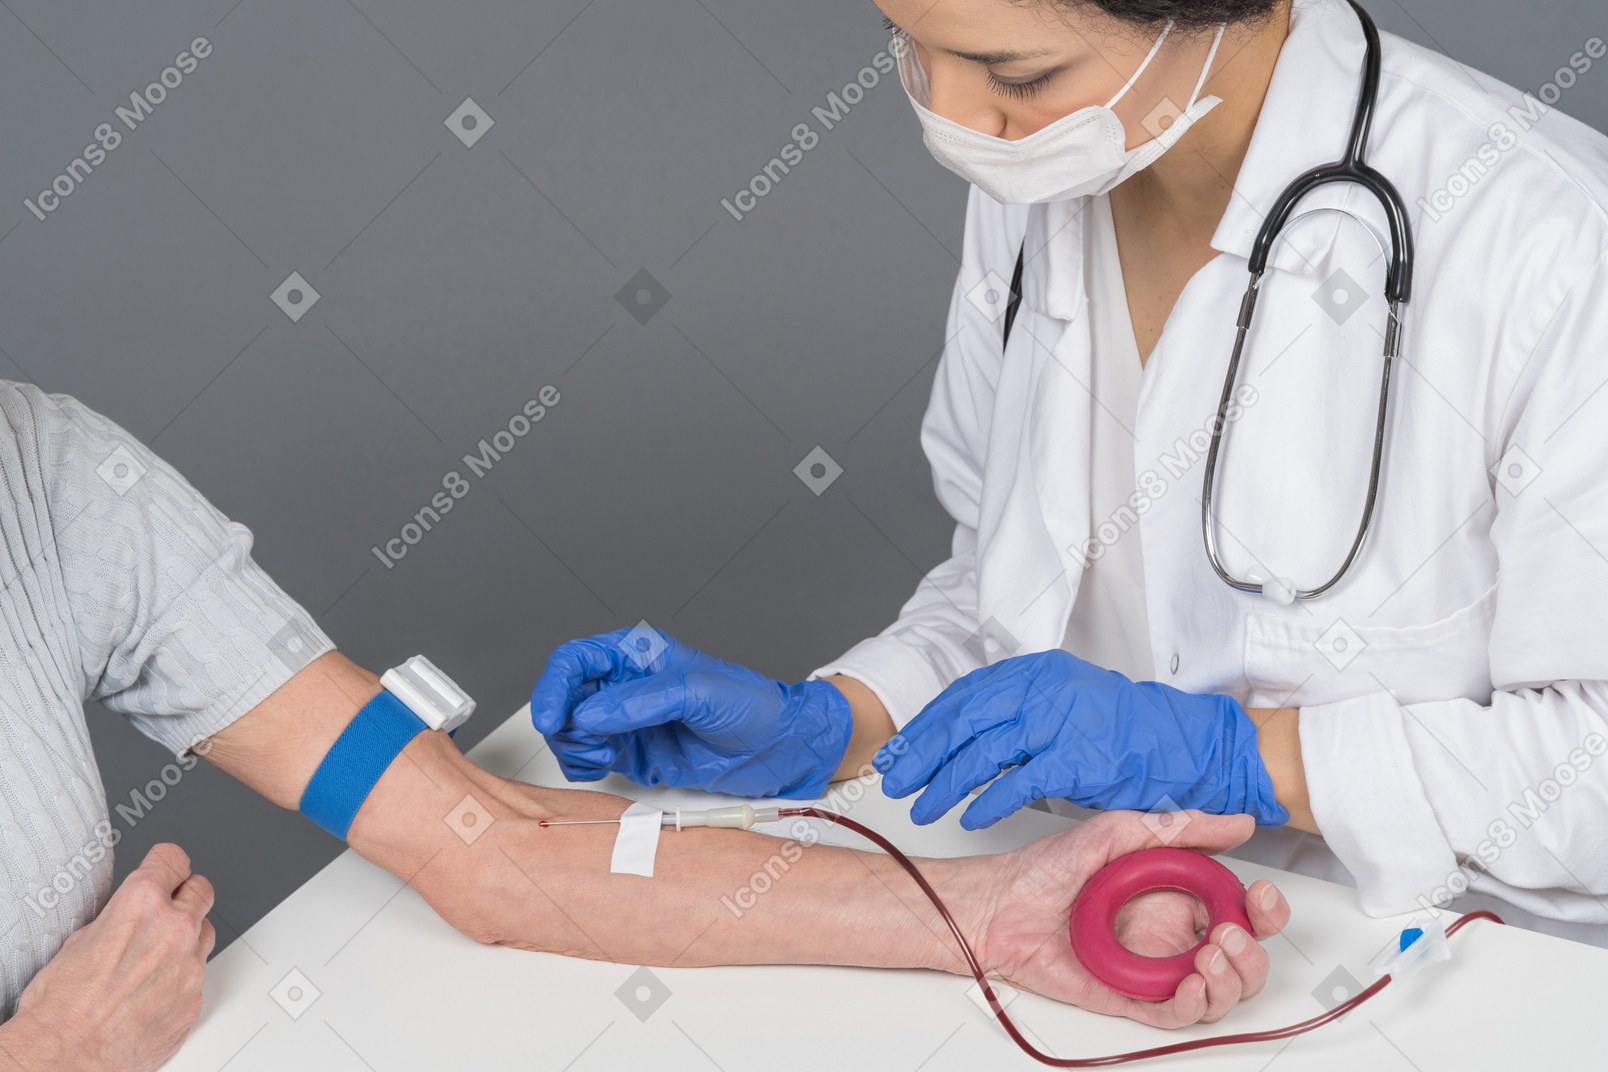 Female doctor taking blood from patient's vein